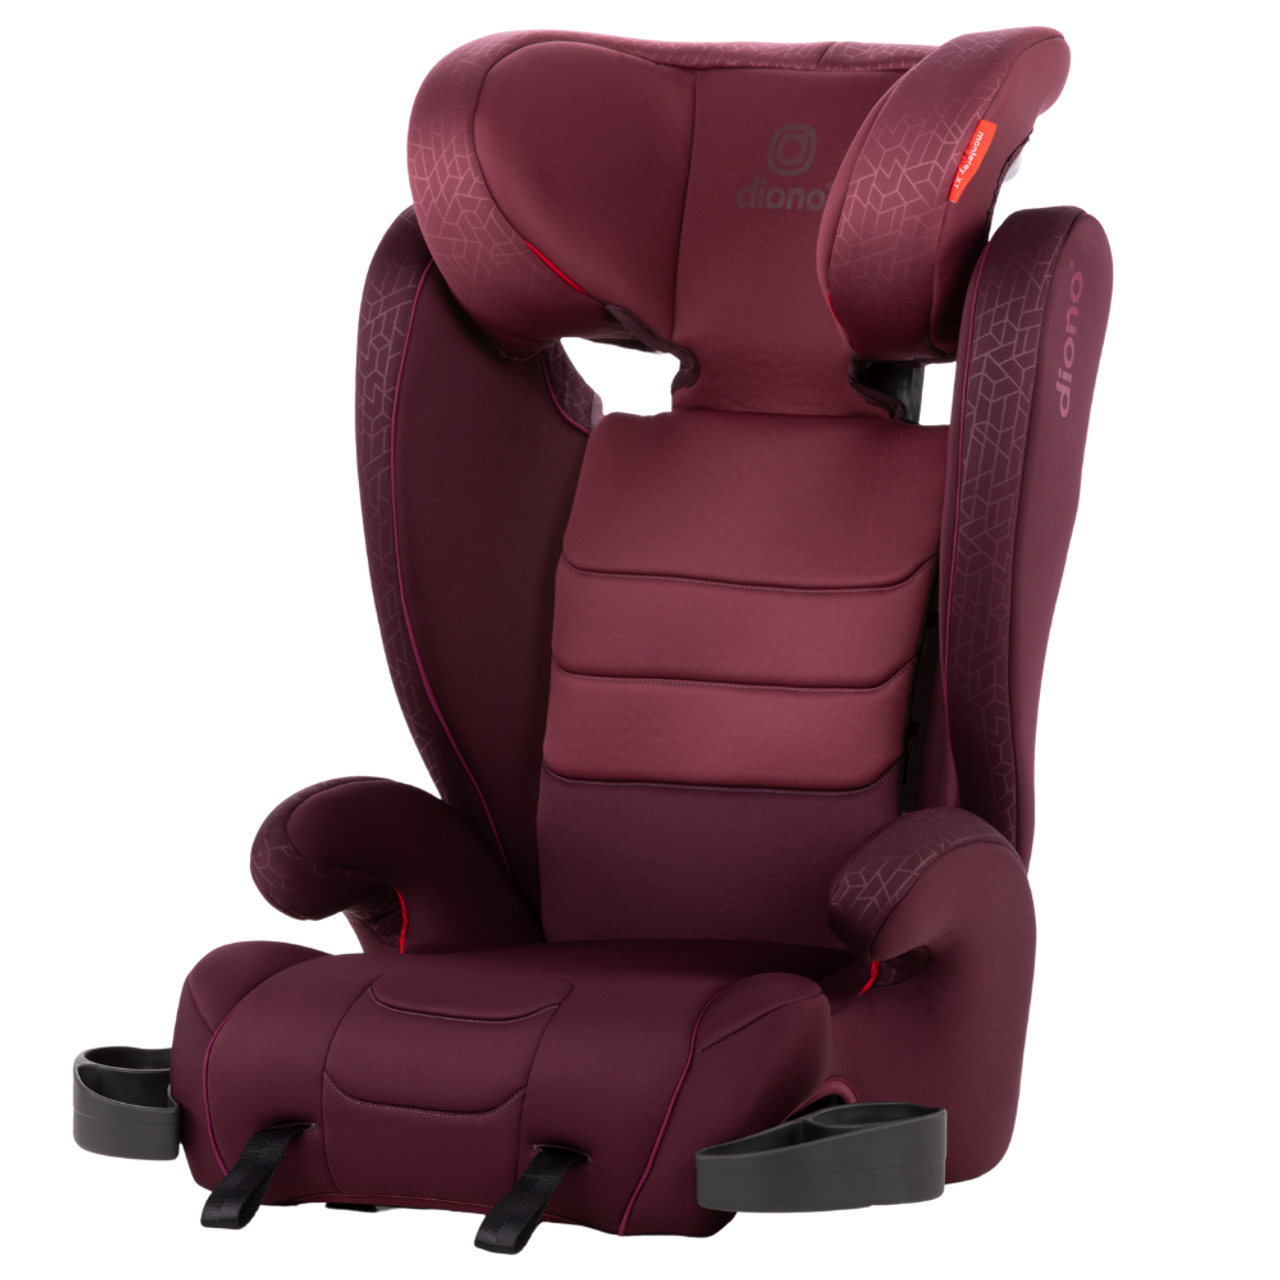 Diono Monterey Positioning Booster Seat